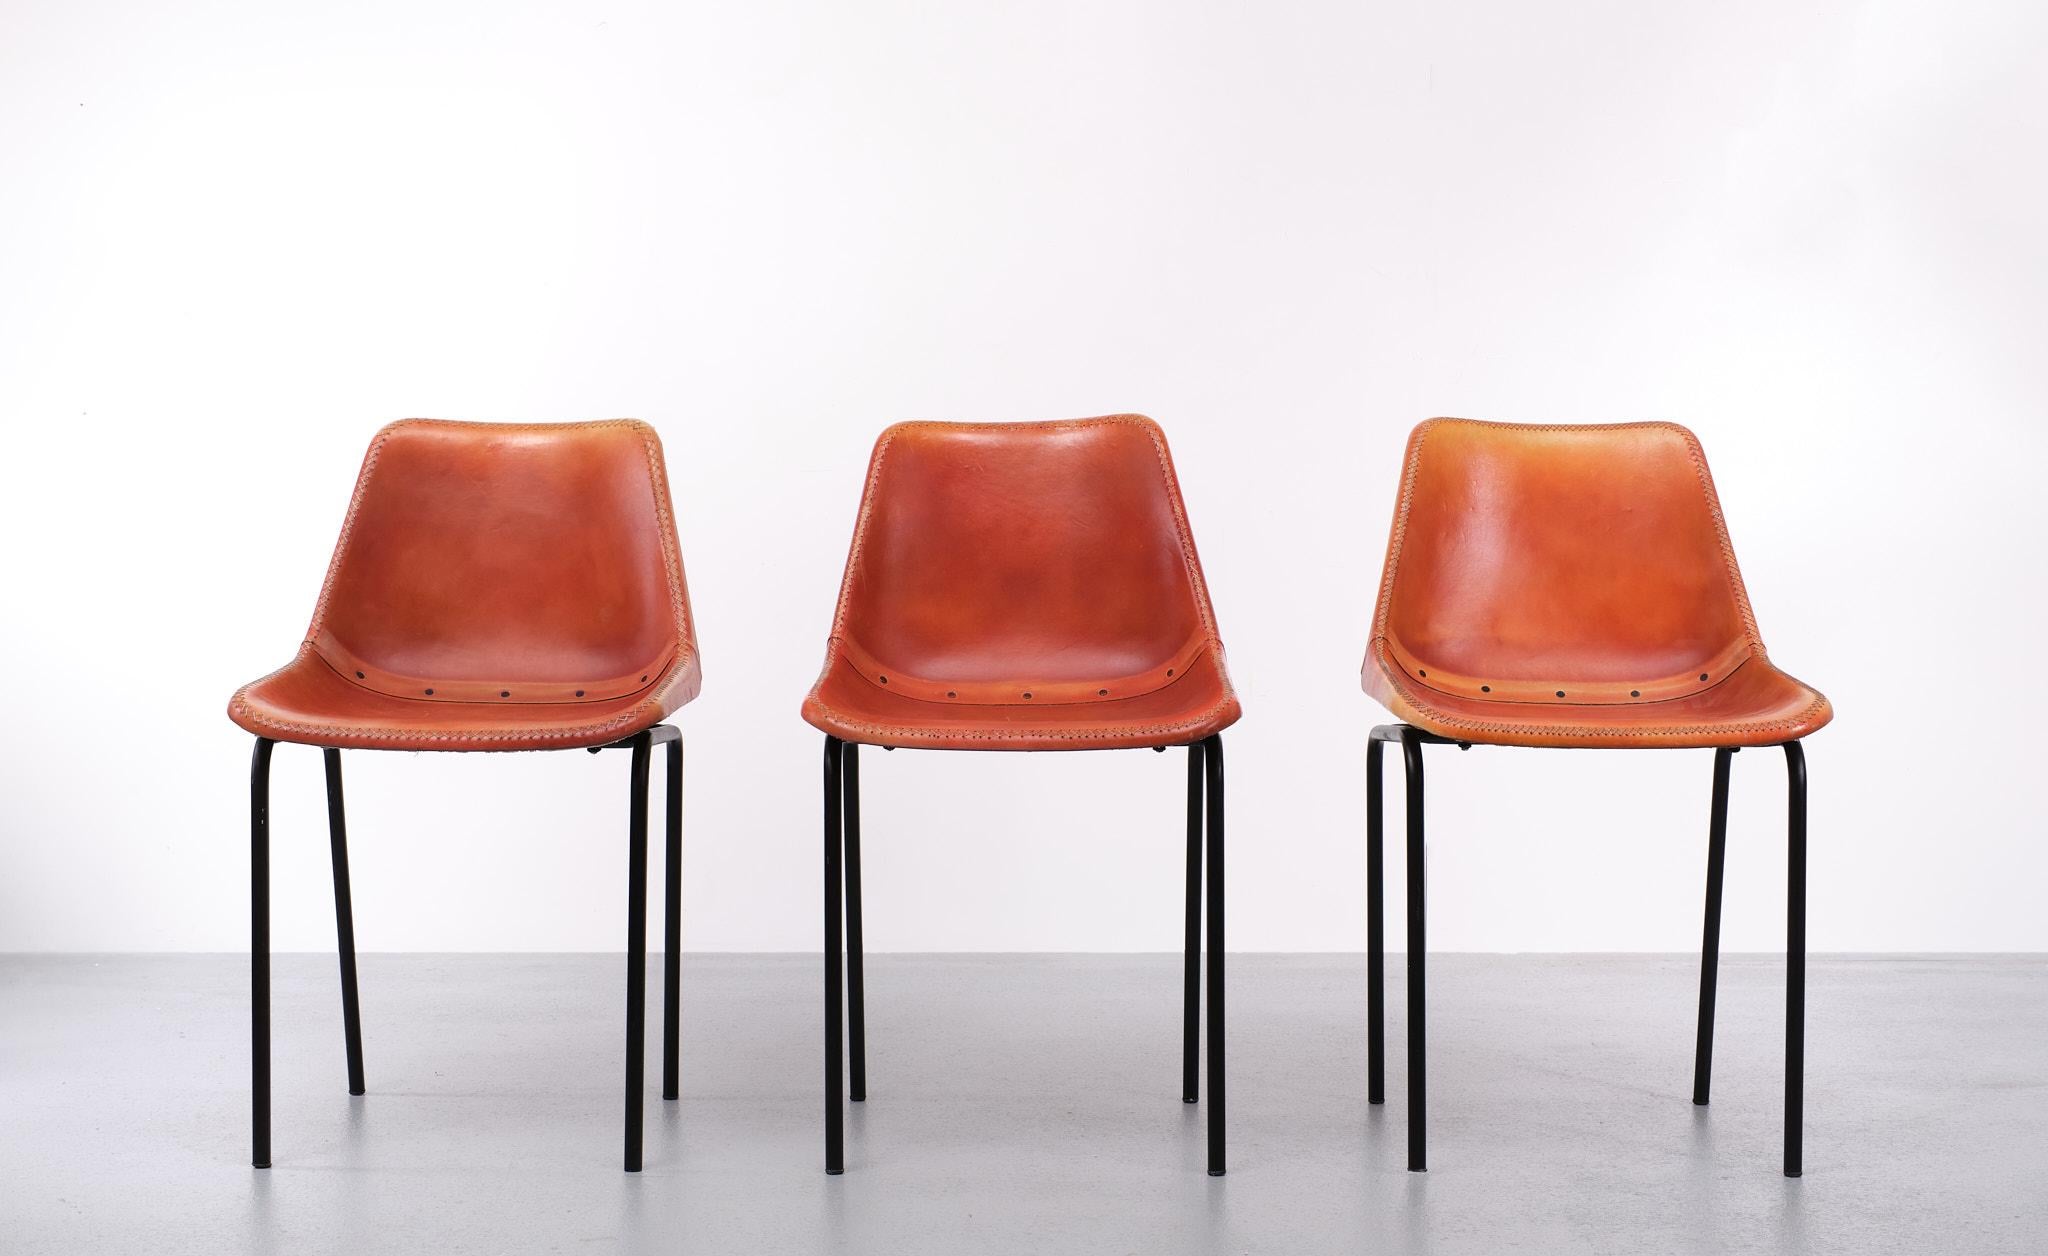 Very nice set of Three bucket seat chairs covert with Goatskin Leather .
good seating comfort . Nice stitching  details. Kare Design Germany . 

Please don't hesitate to reach out for alternative shipping quote